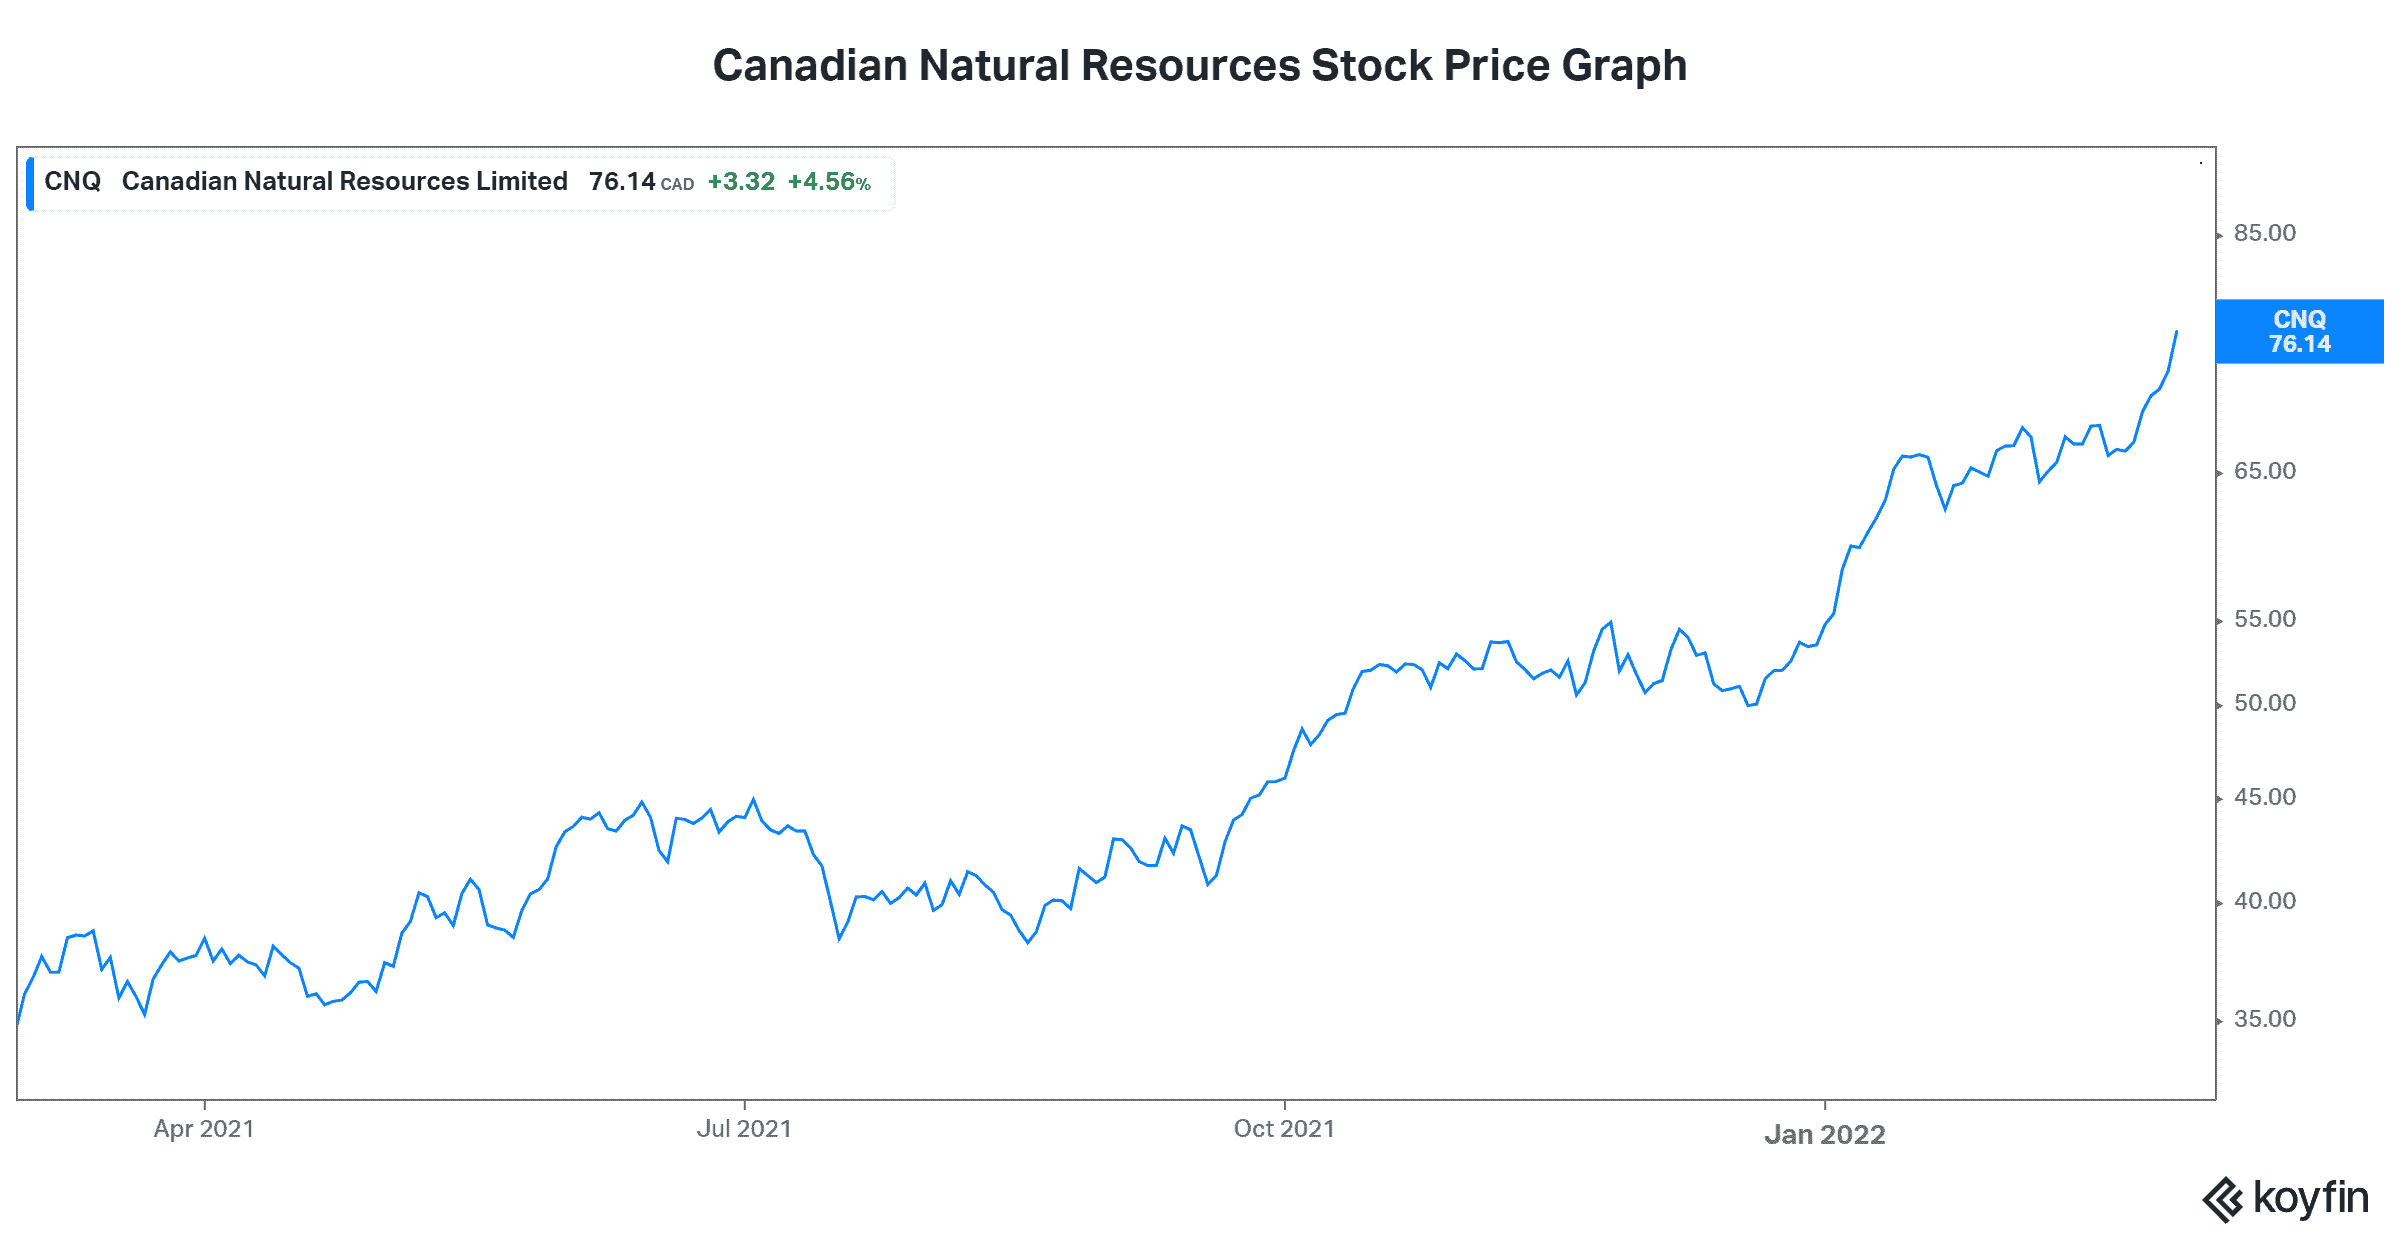 Canadian Natural Resources stock price, CNQ stock